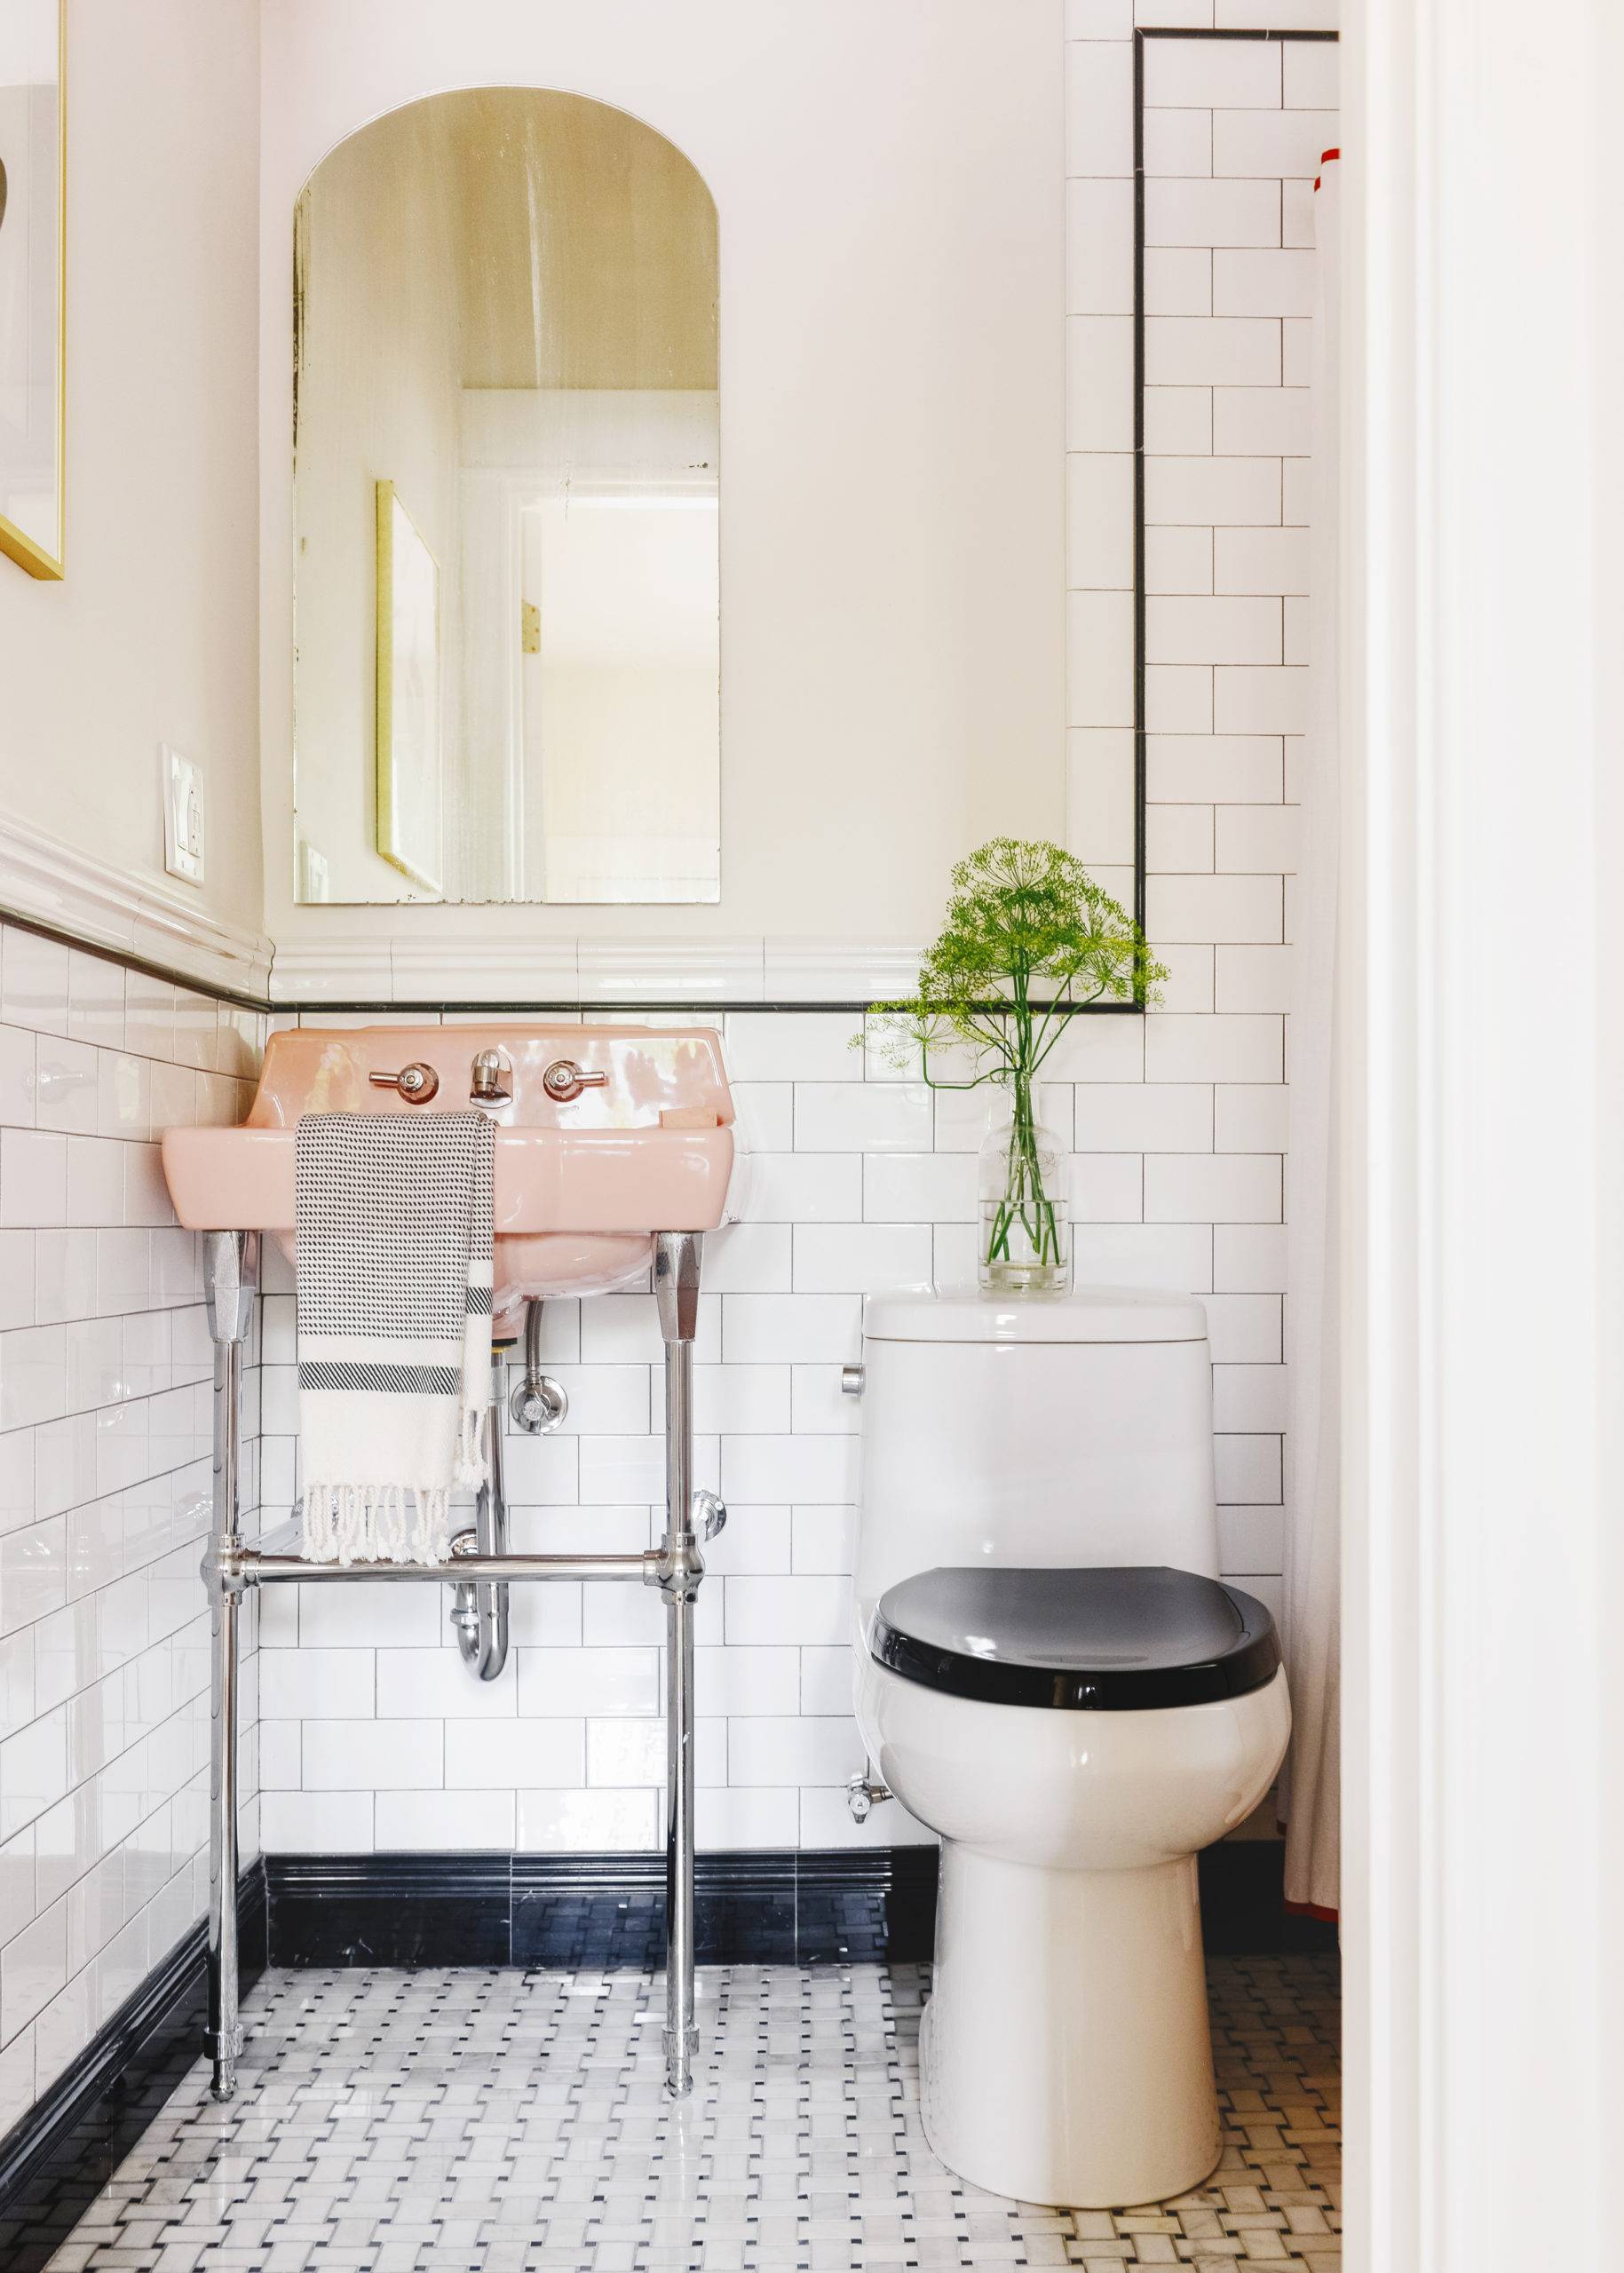 Small tiled bathroom with white subway tile backsplash and marble mosaic flooring with vintage pink sink